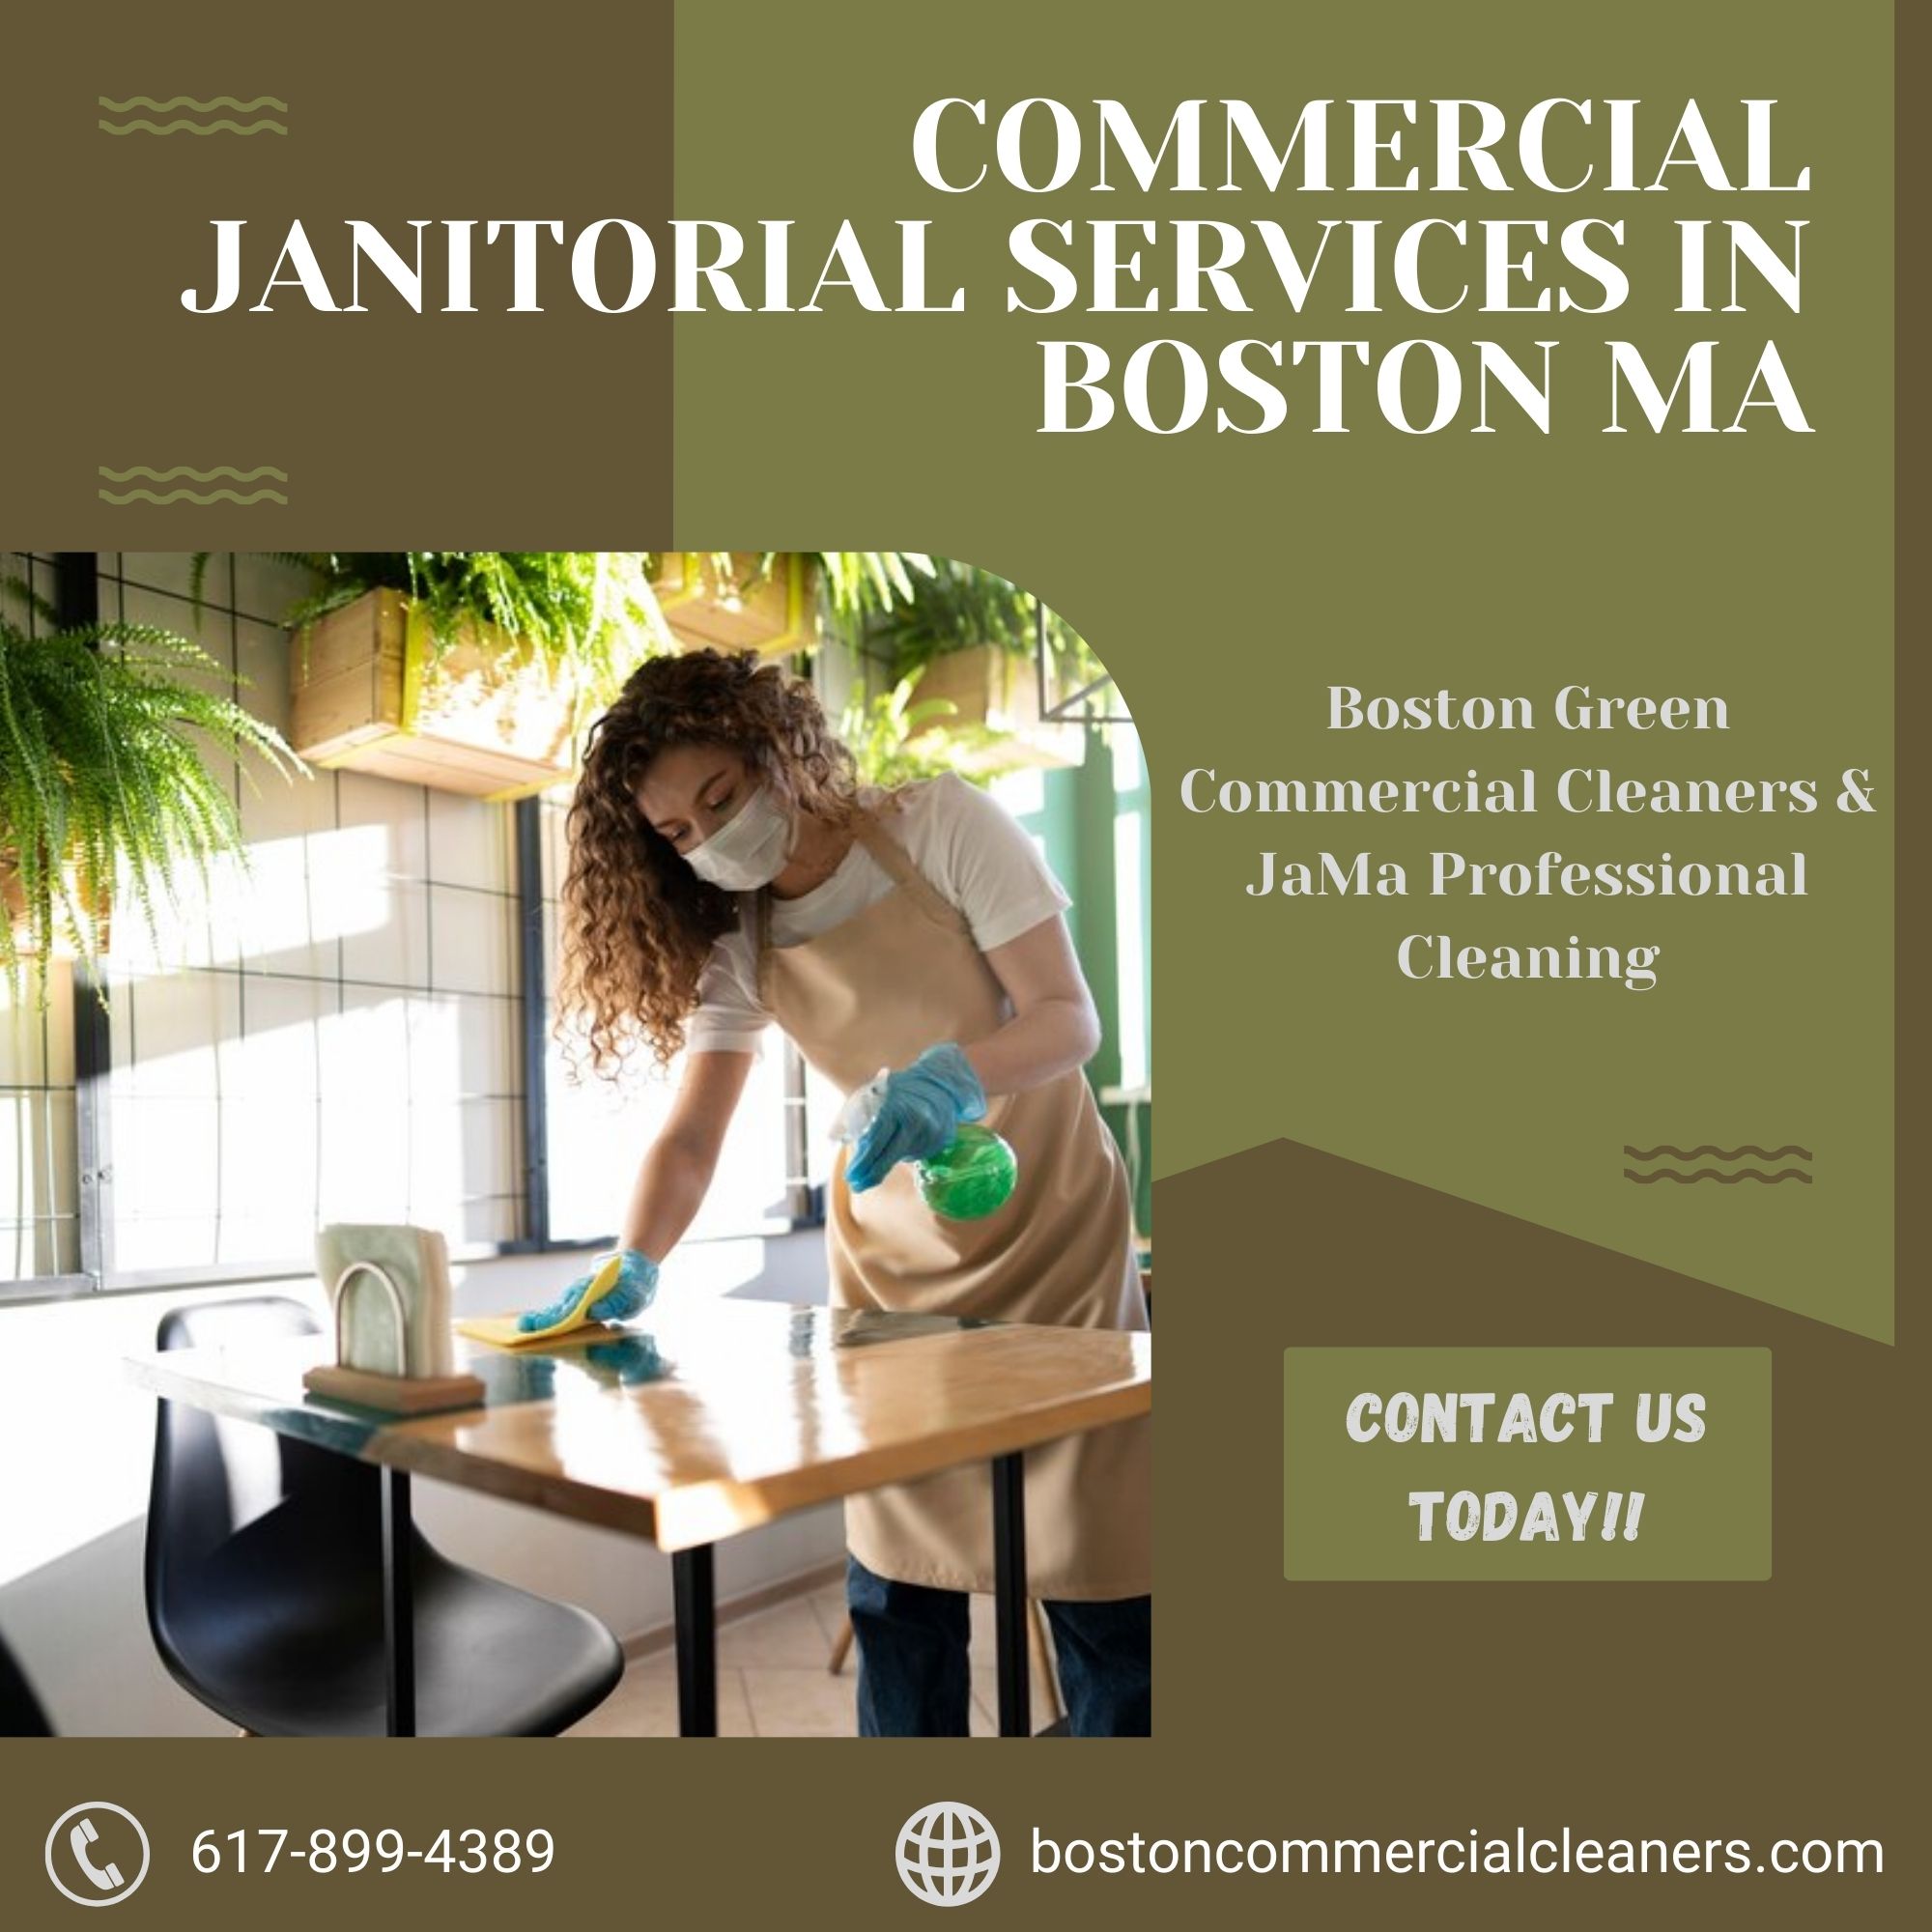  Commercial Janitorial Services in Boston MA